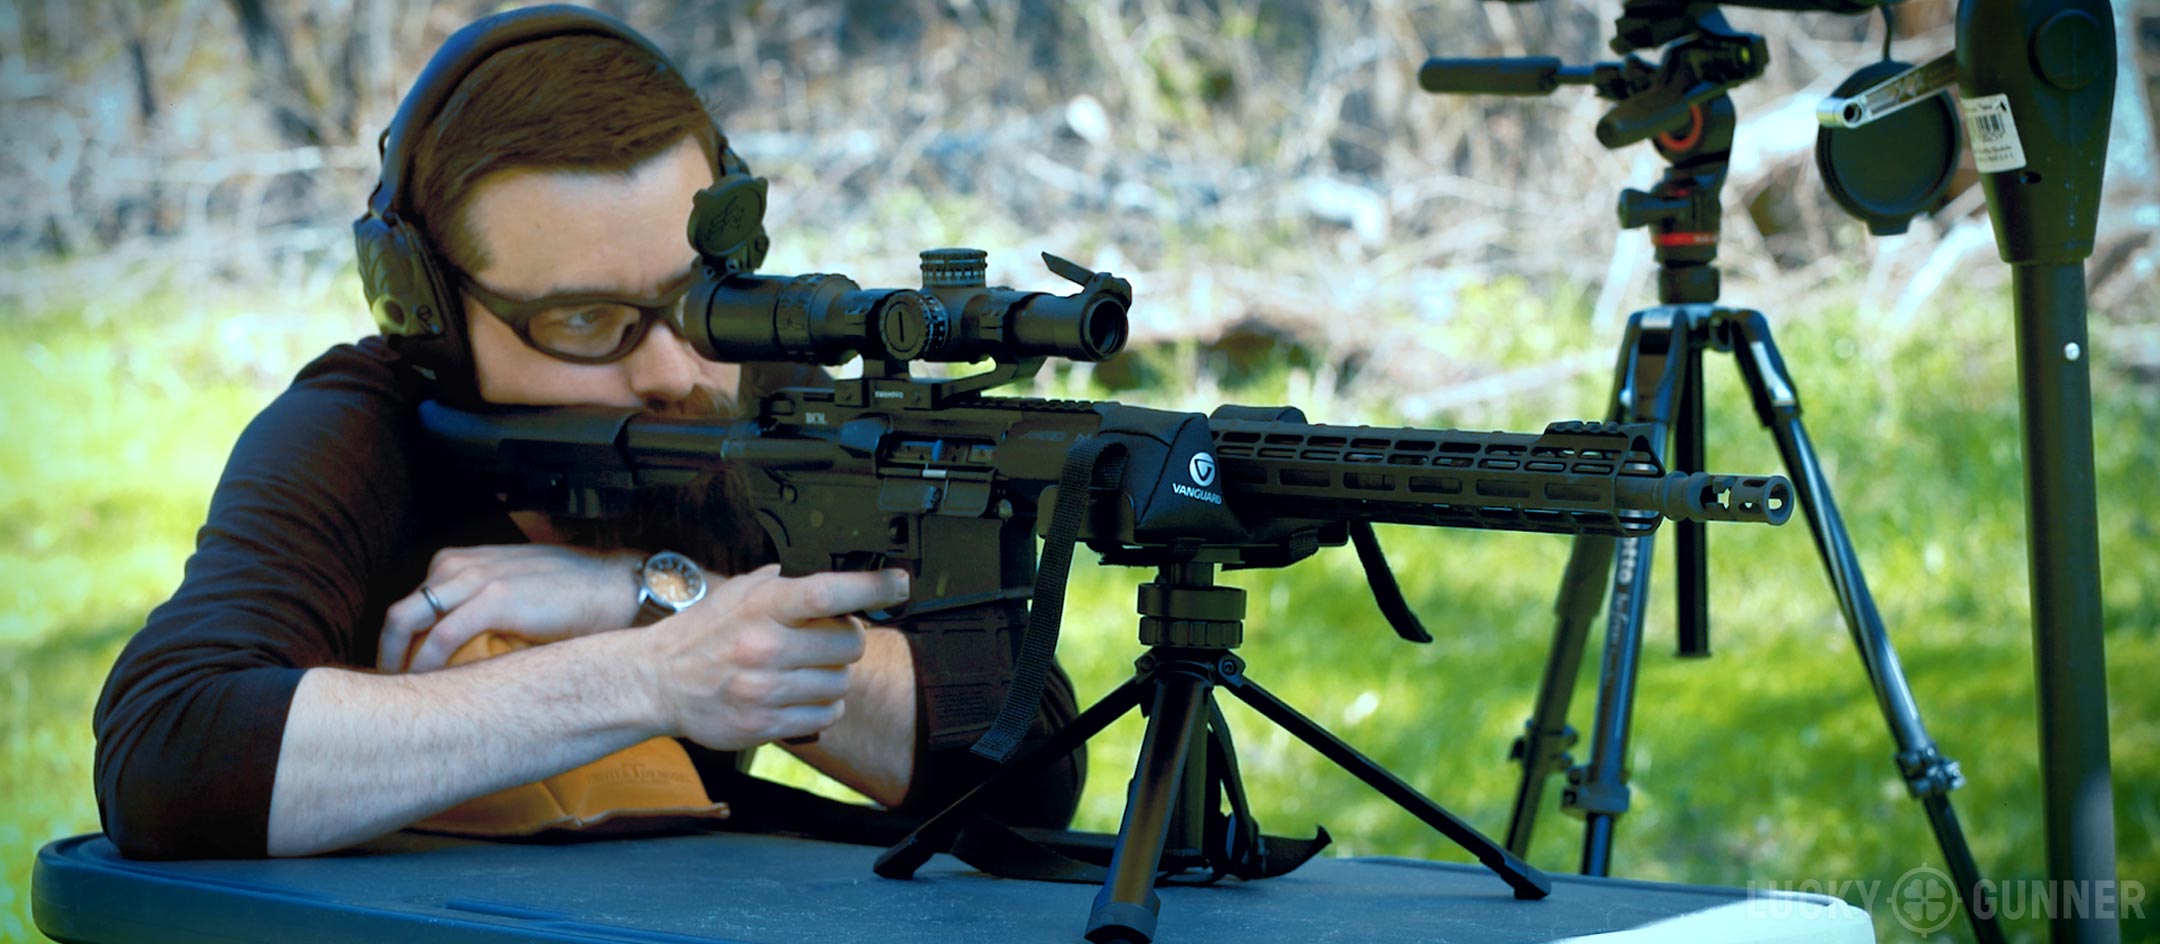 Our Sighting In A Rifle: Accuracy Must Be First Priority Statements